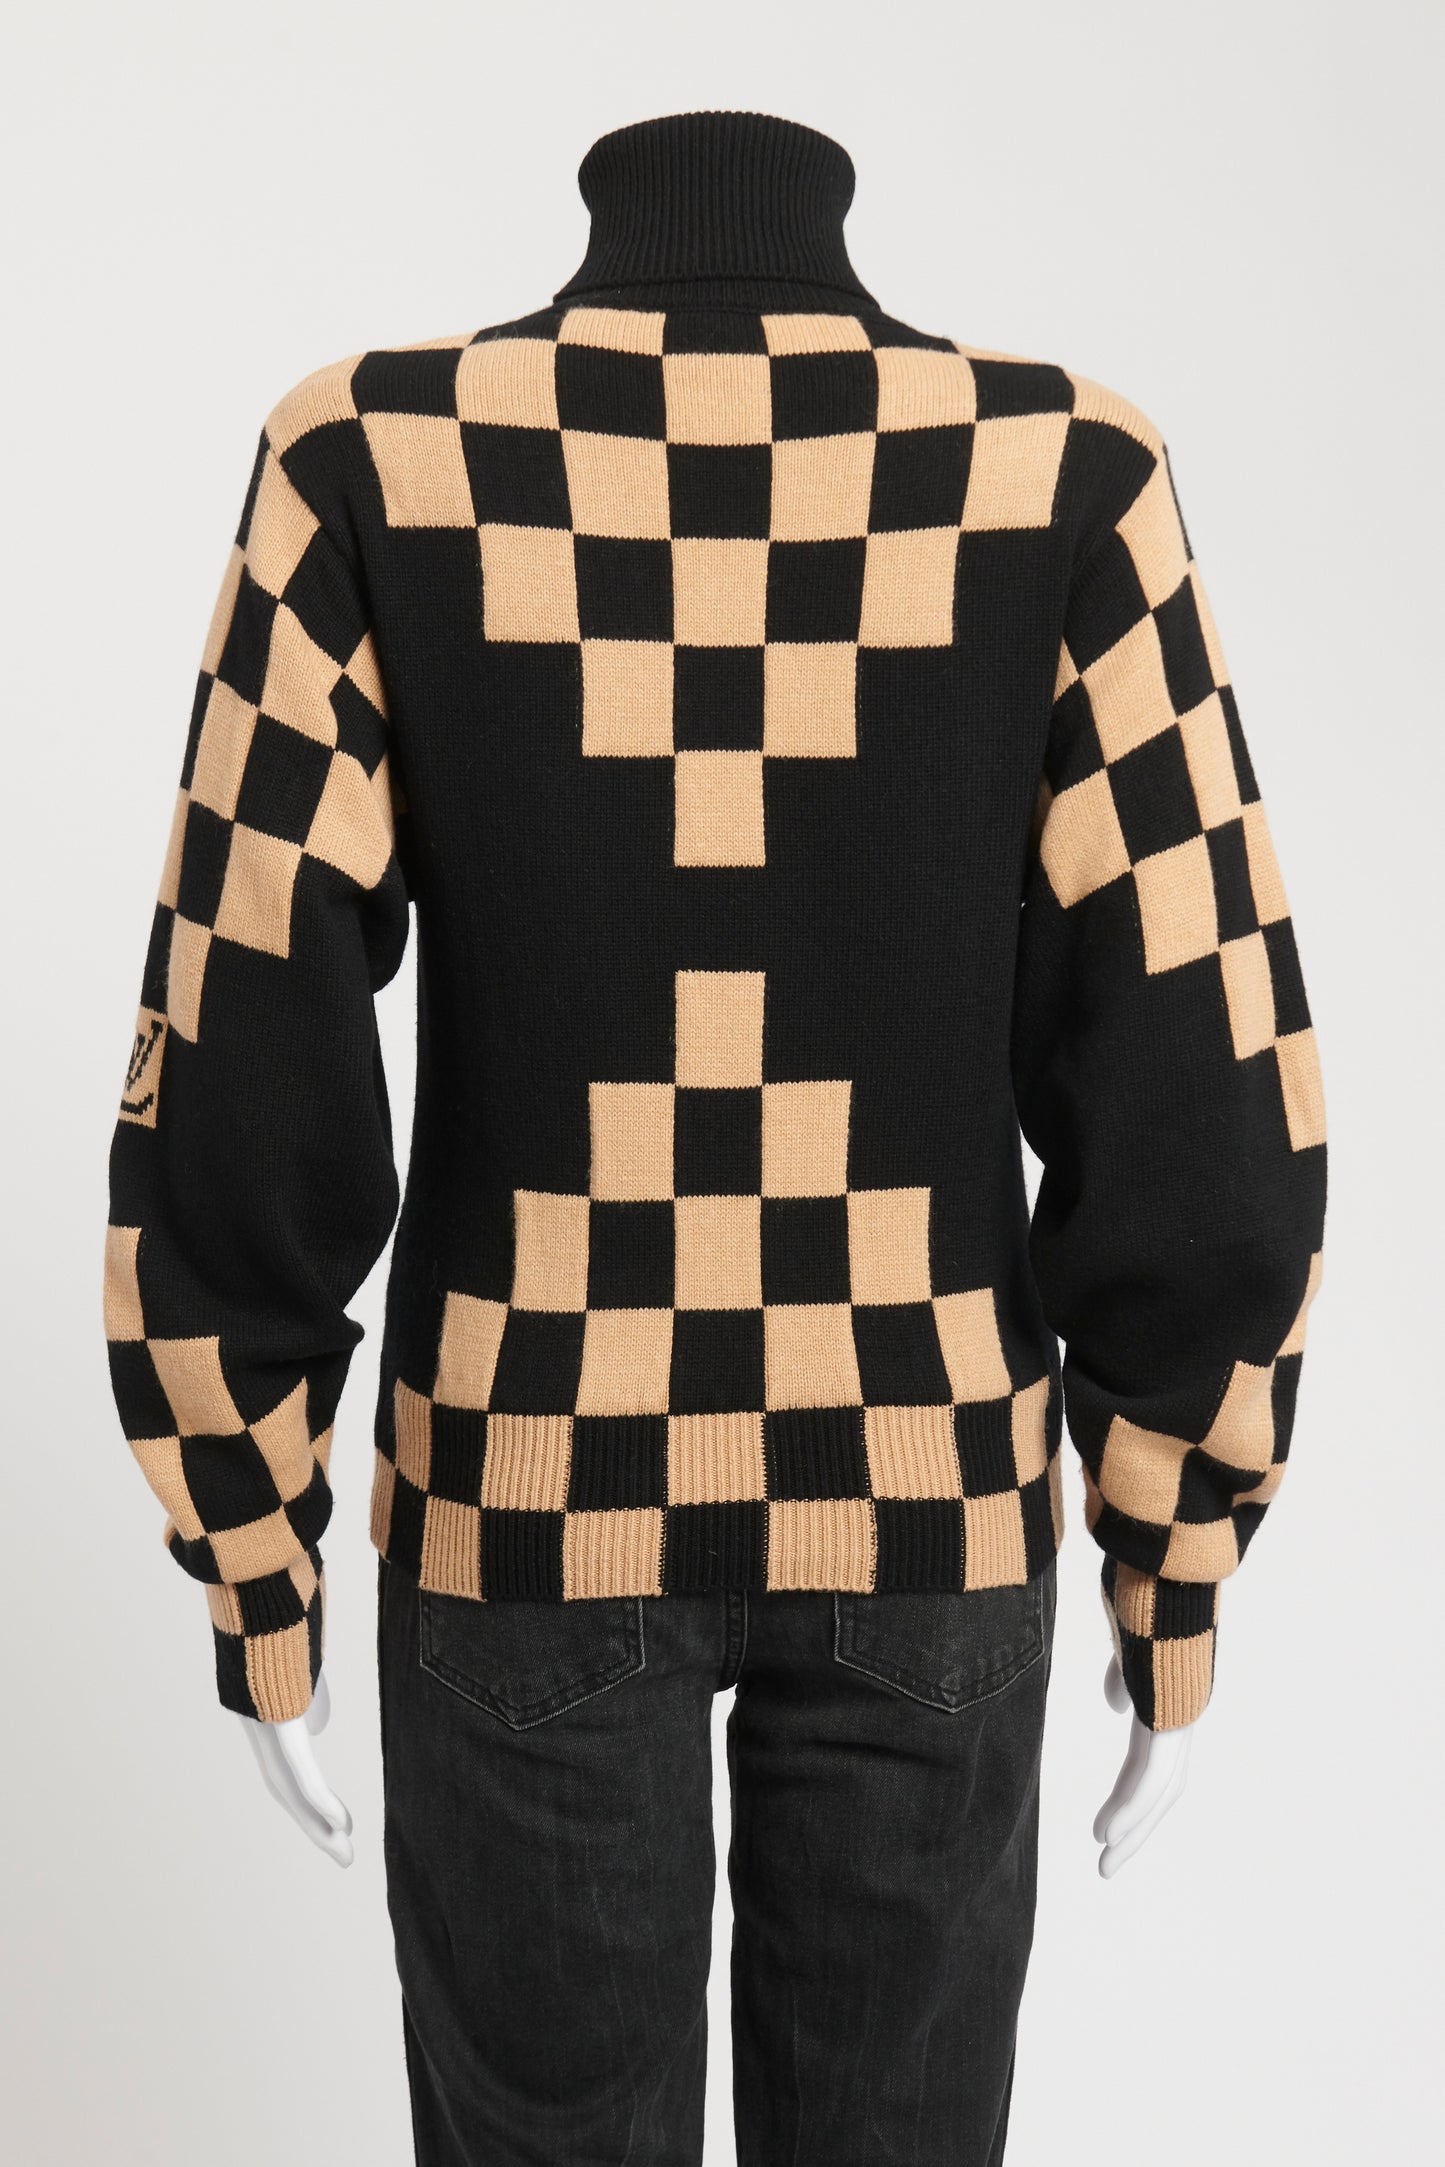 Black Wool and Cashmere Preowned Damier Pixel Illusion Turtle Neck Jumper